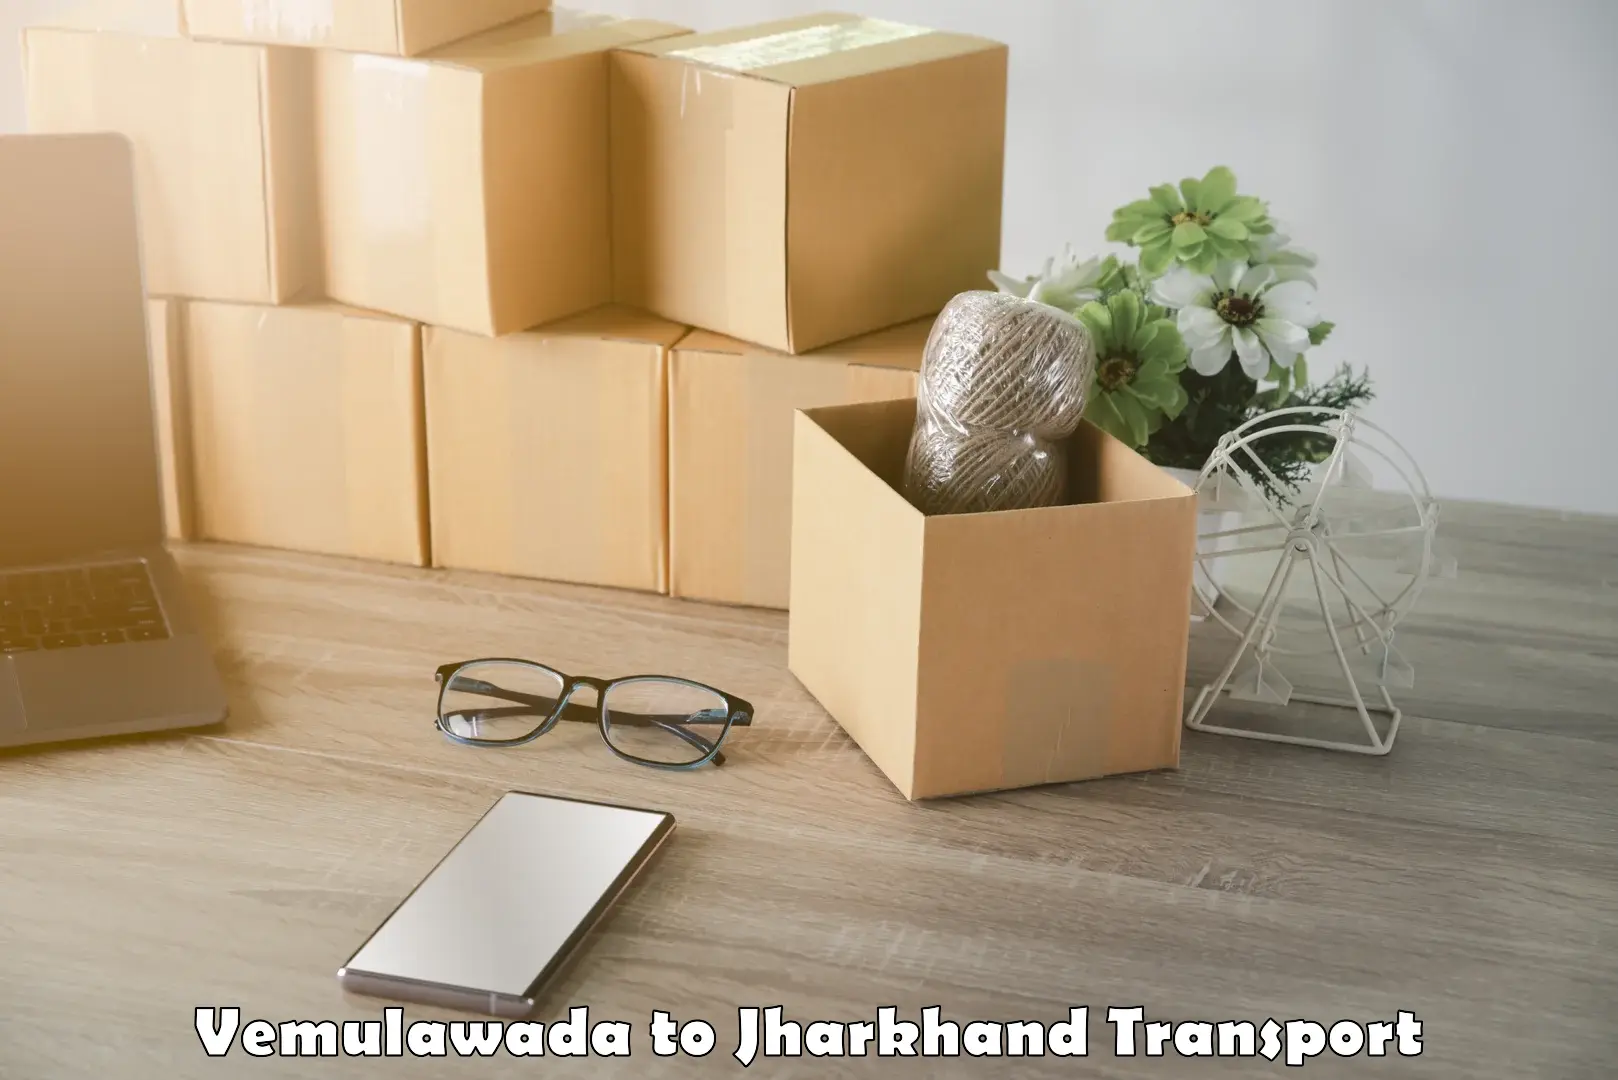 Vehicle transport services Vemulawada to Jharkhand